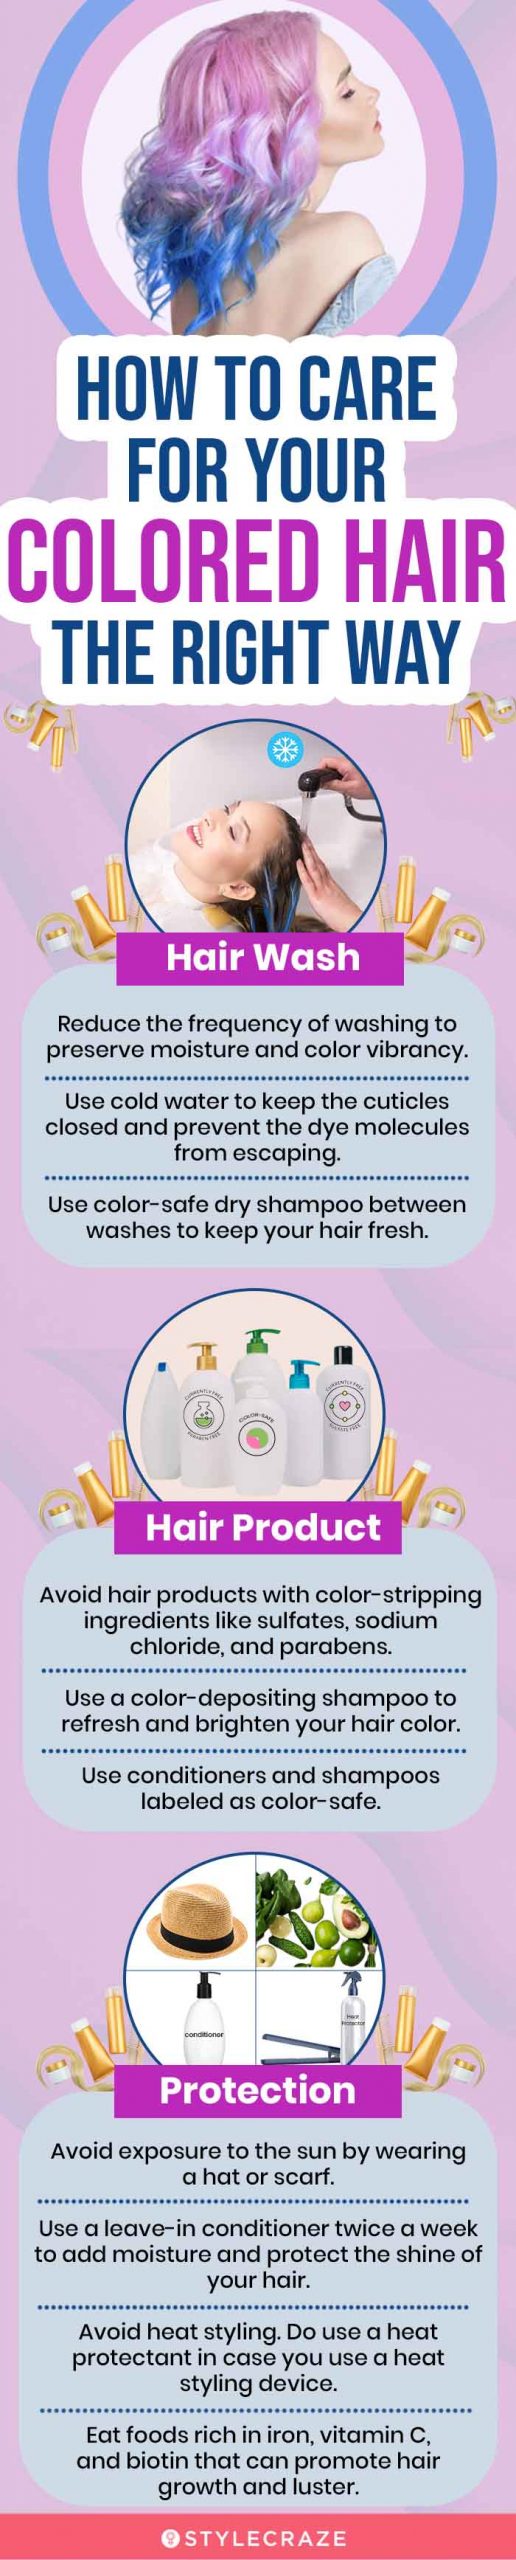 How To Care For Your Colored Hair The Right Way (infographic)